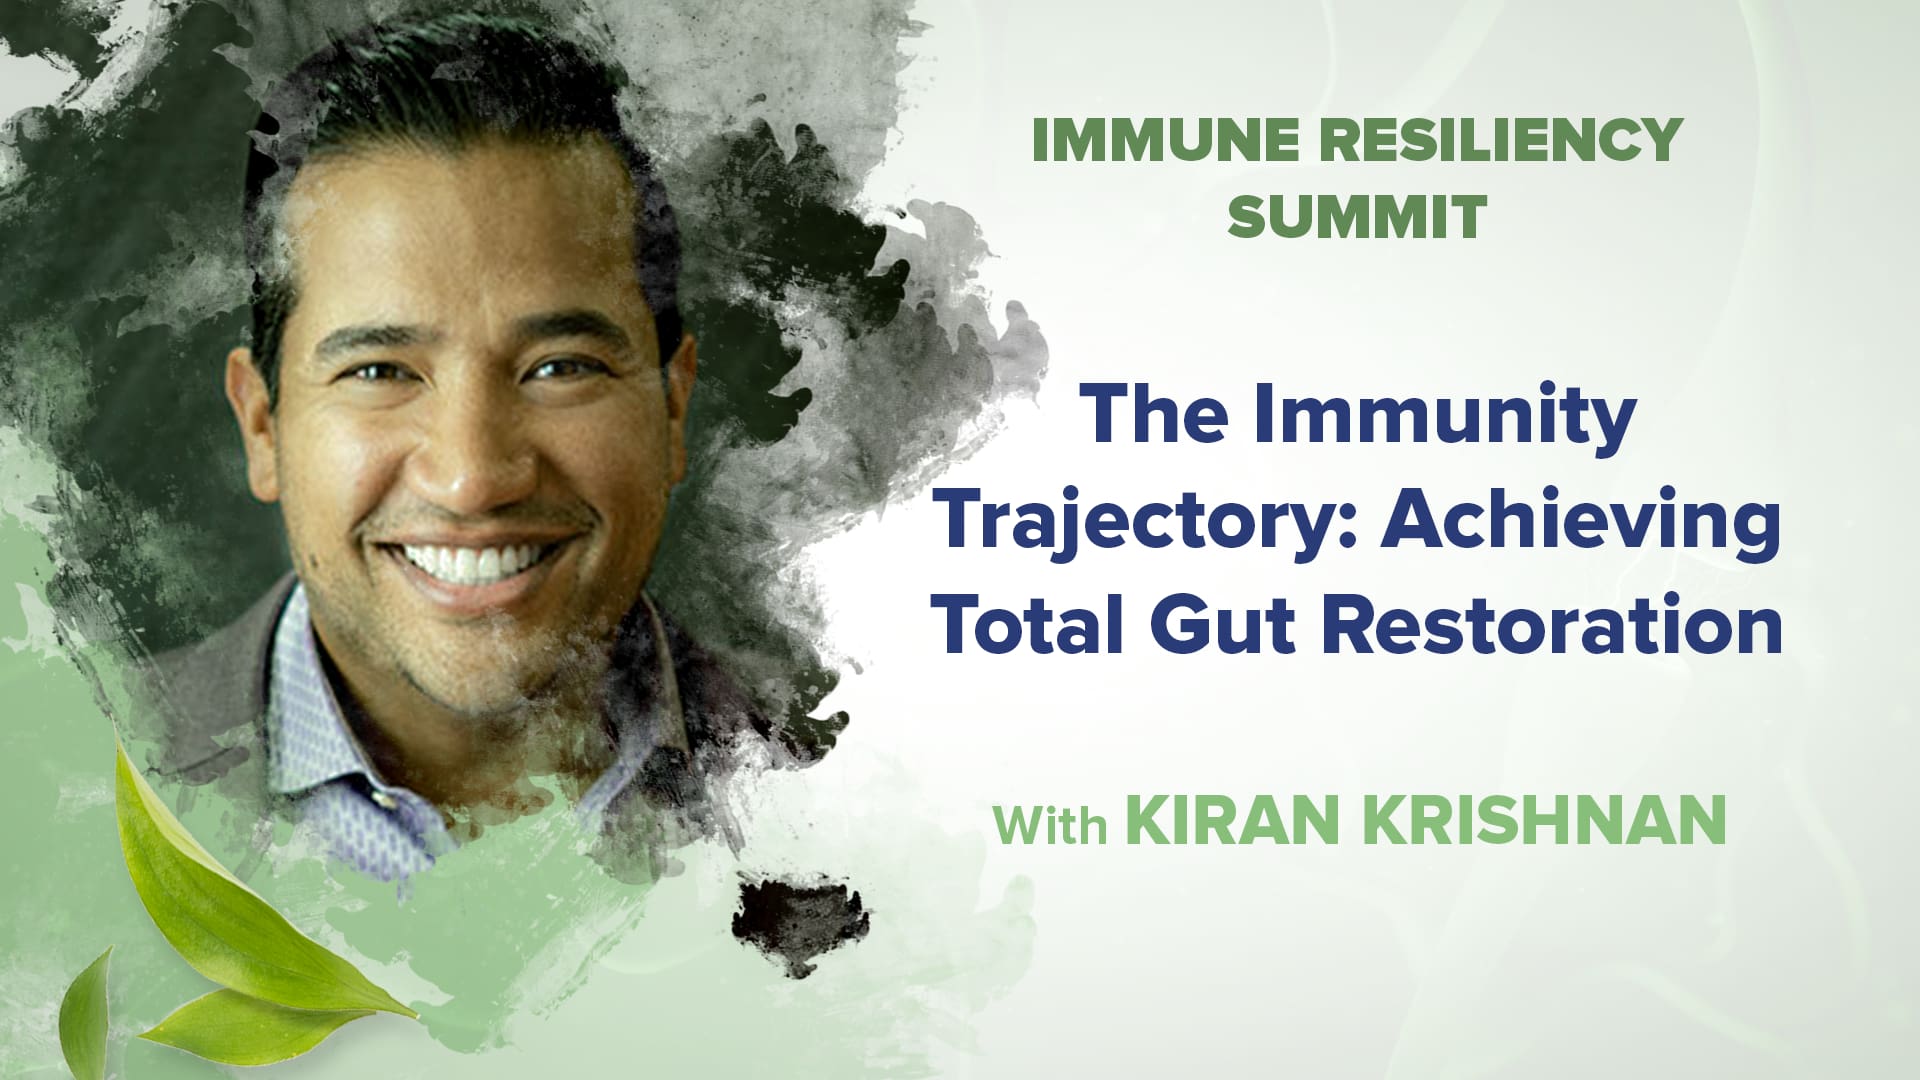 The Immunity Trajectory: Achieving Total Gut Restoration